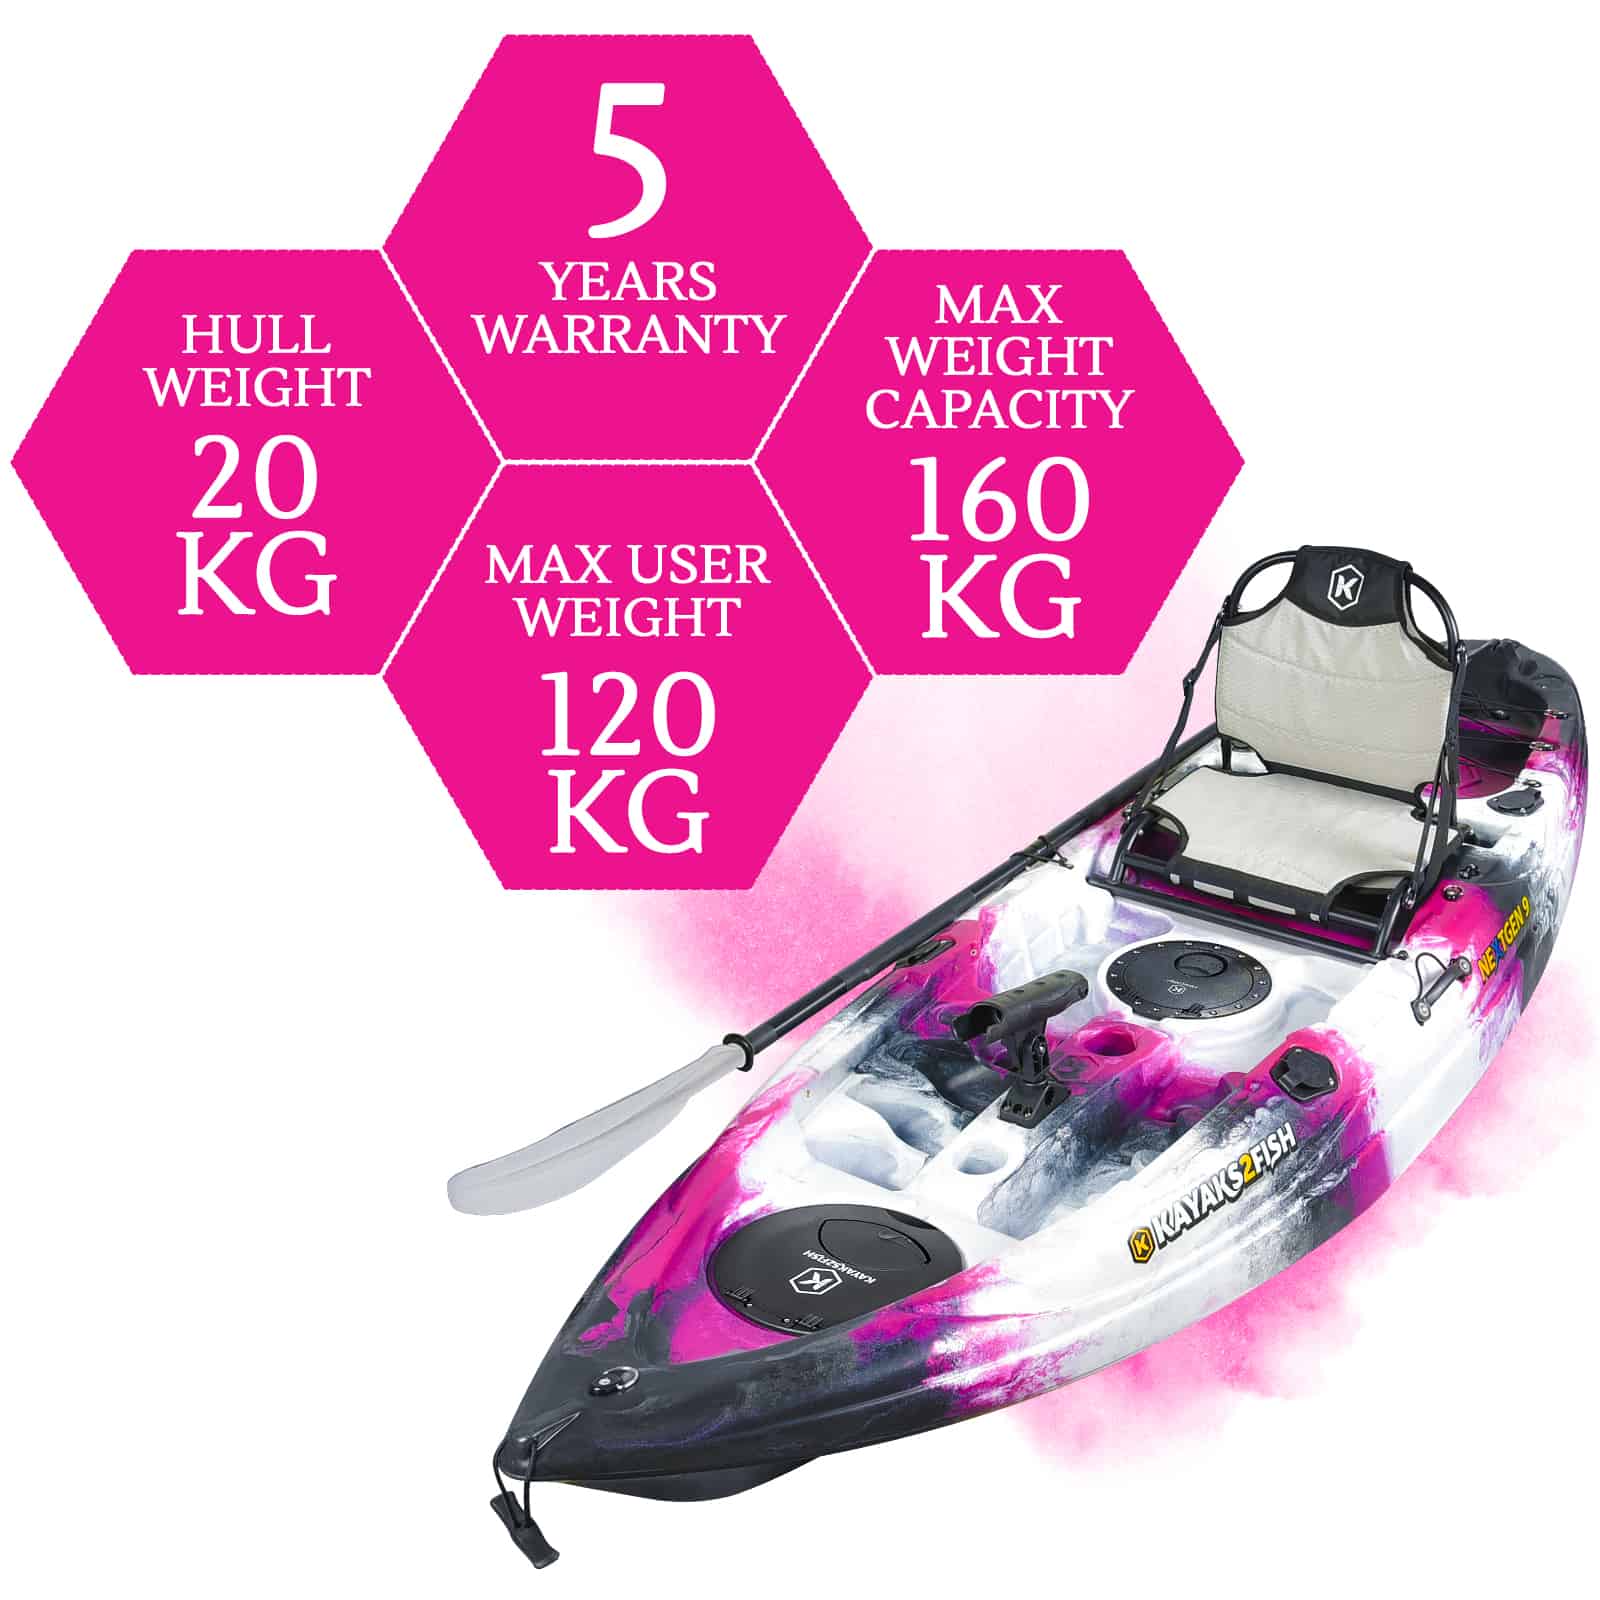 NGB-09-PINKCAMO specifications